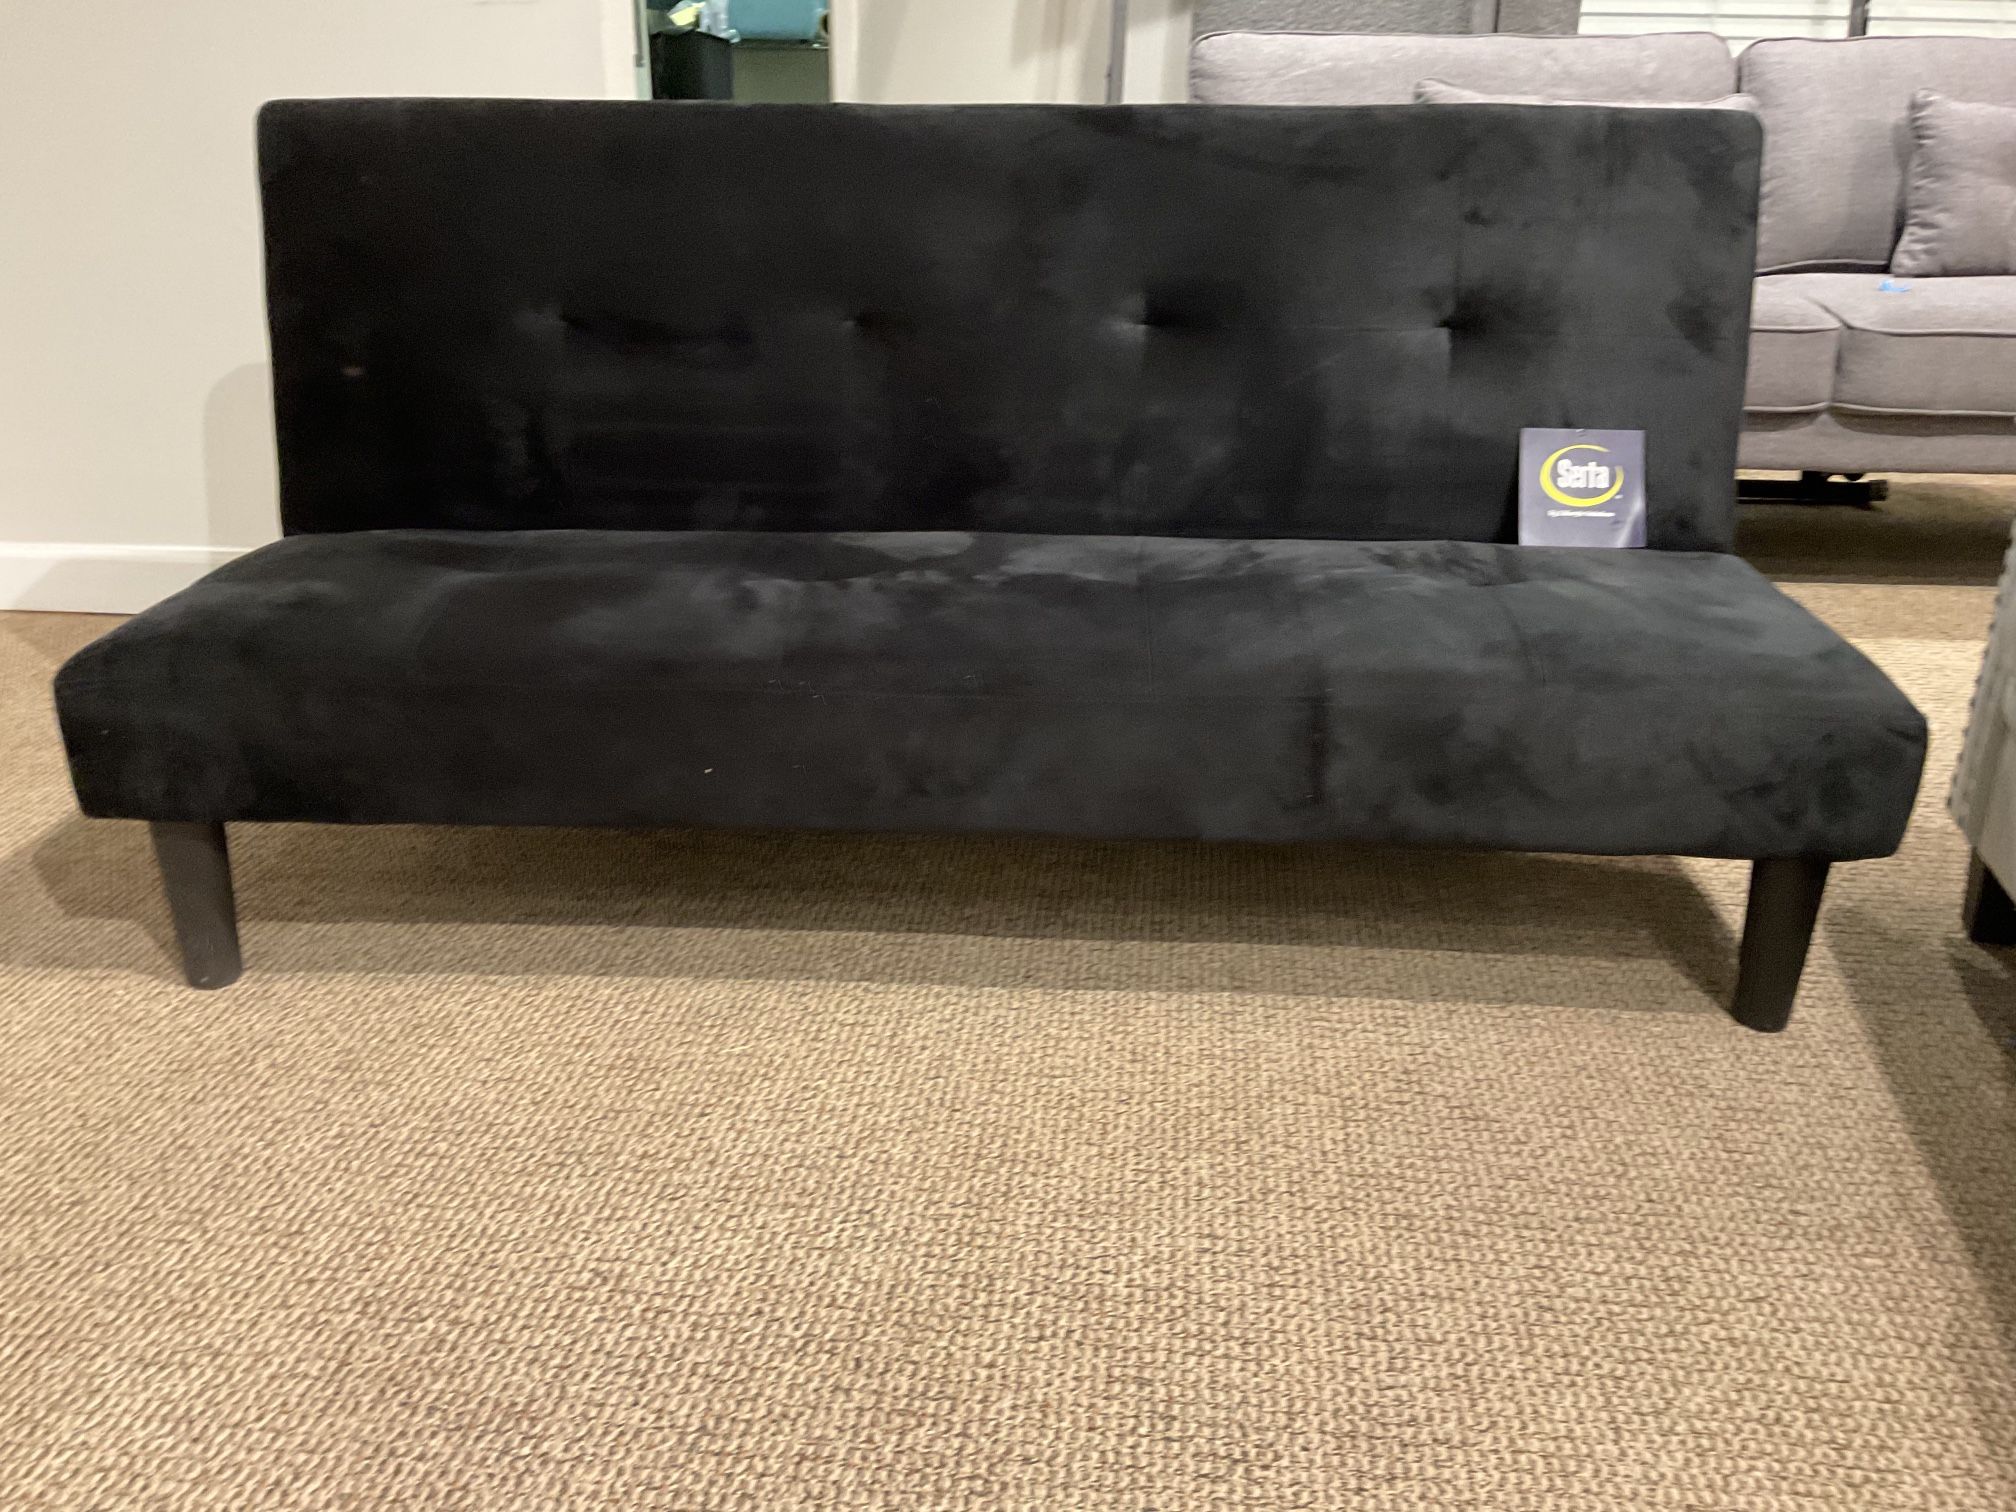 New Futon black color fabric upholstered